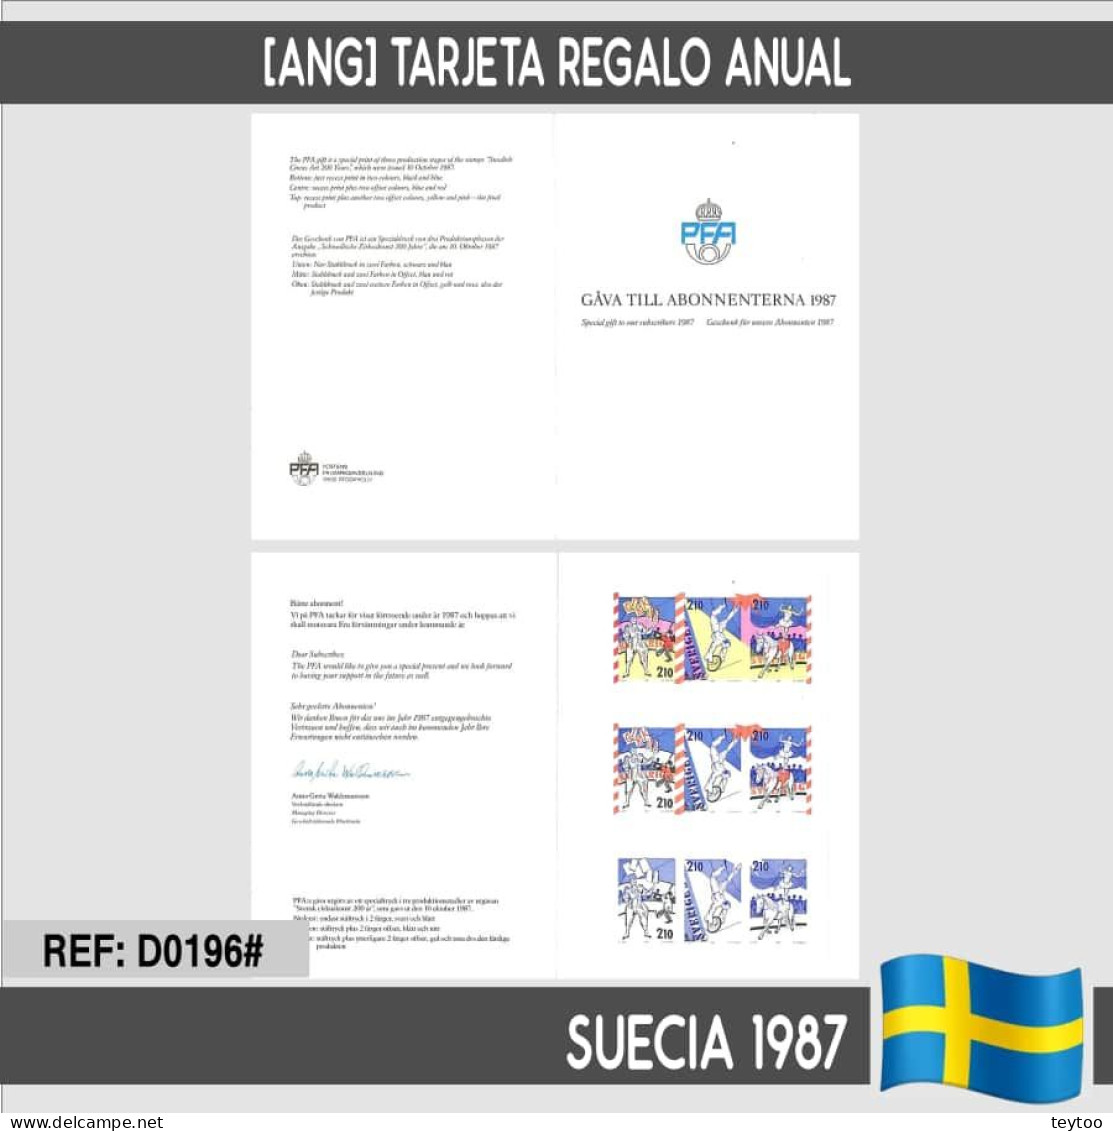 D0196# Suecia 1987 [ANG] Regalo Anual 1987 (N) - Covers & Documents